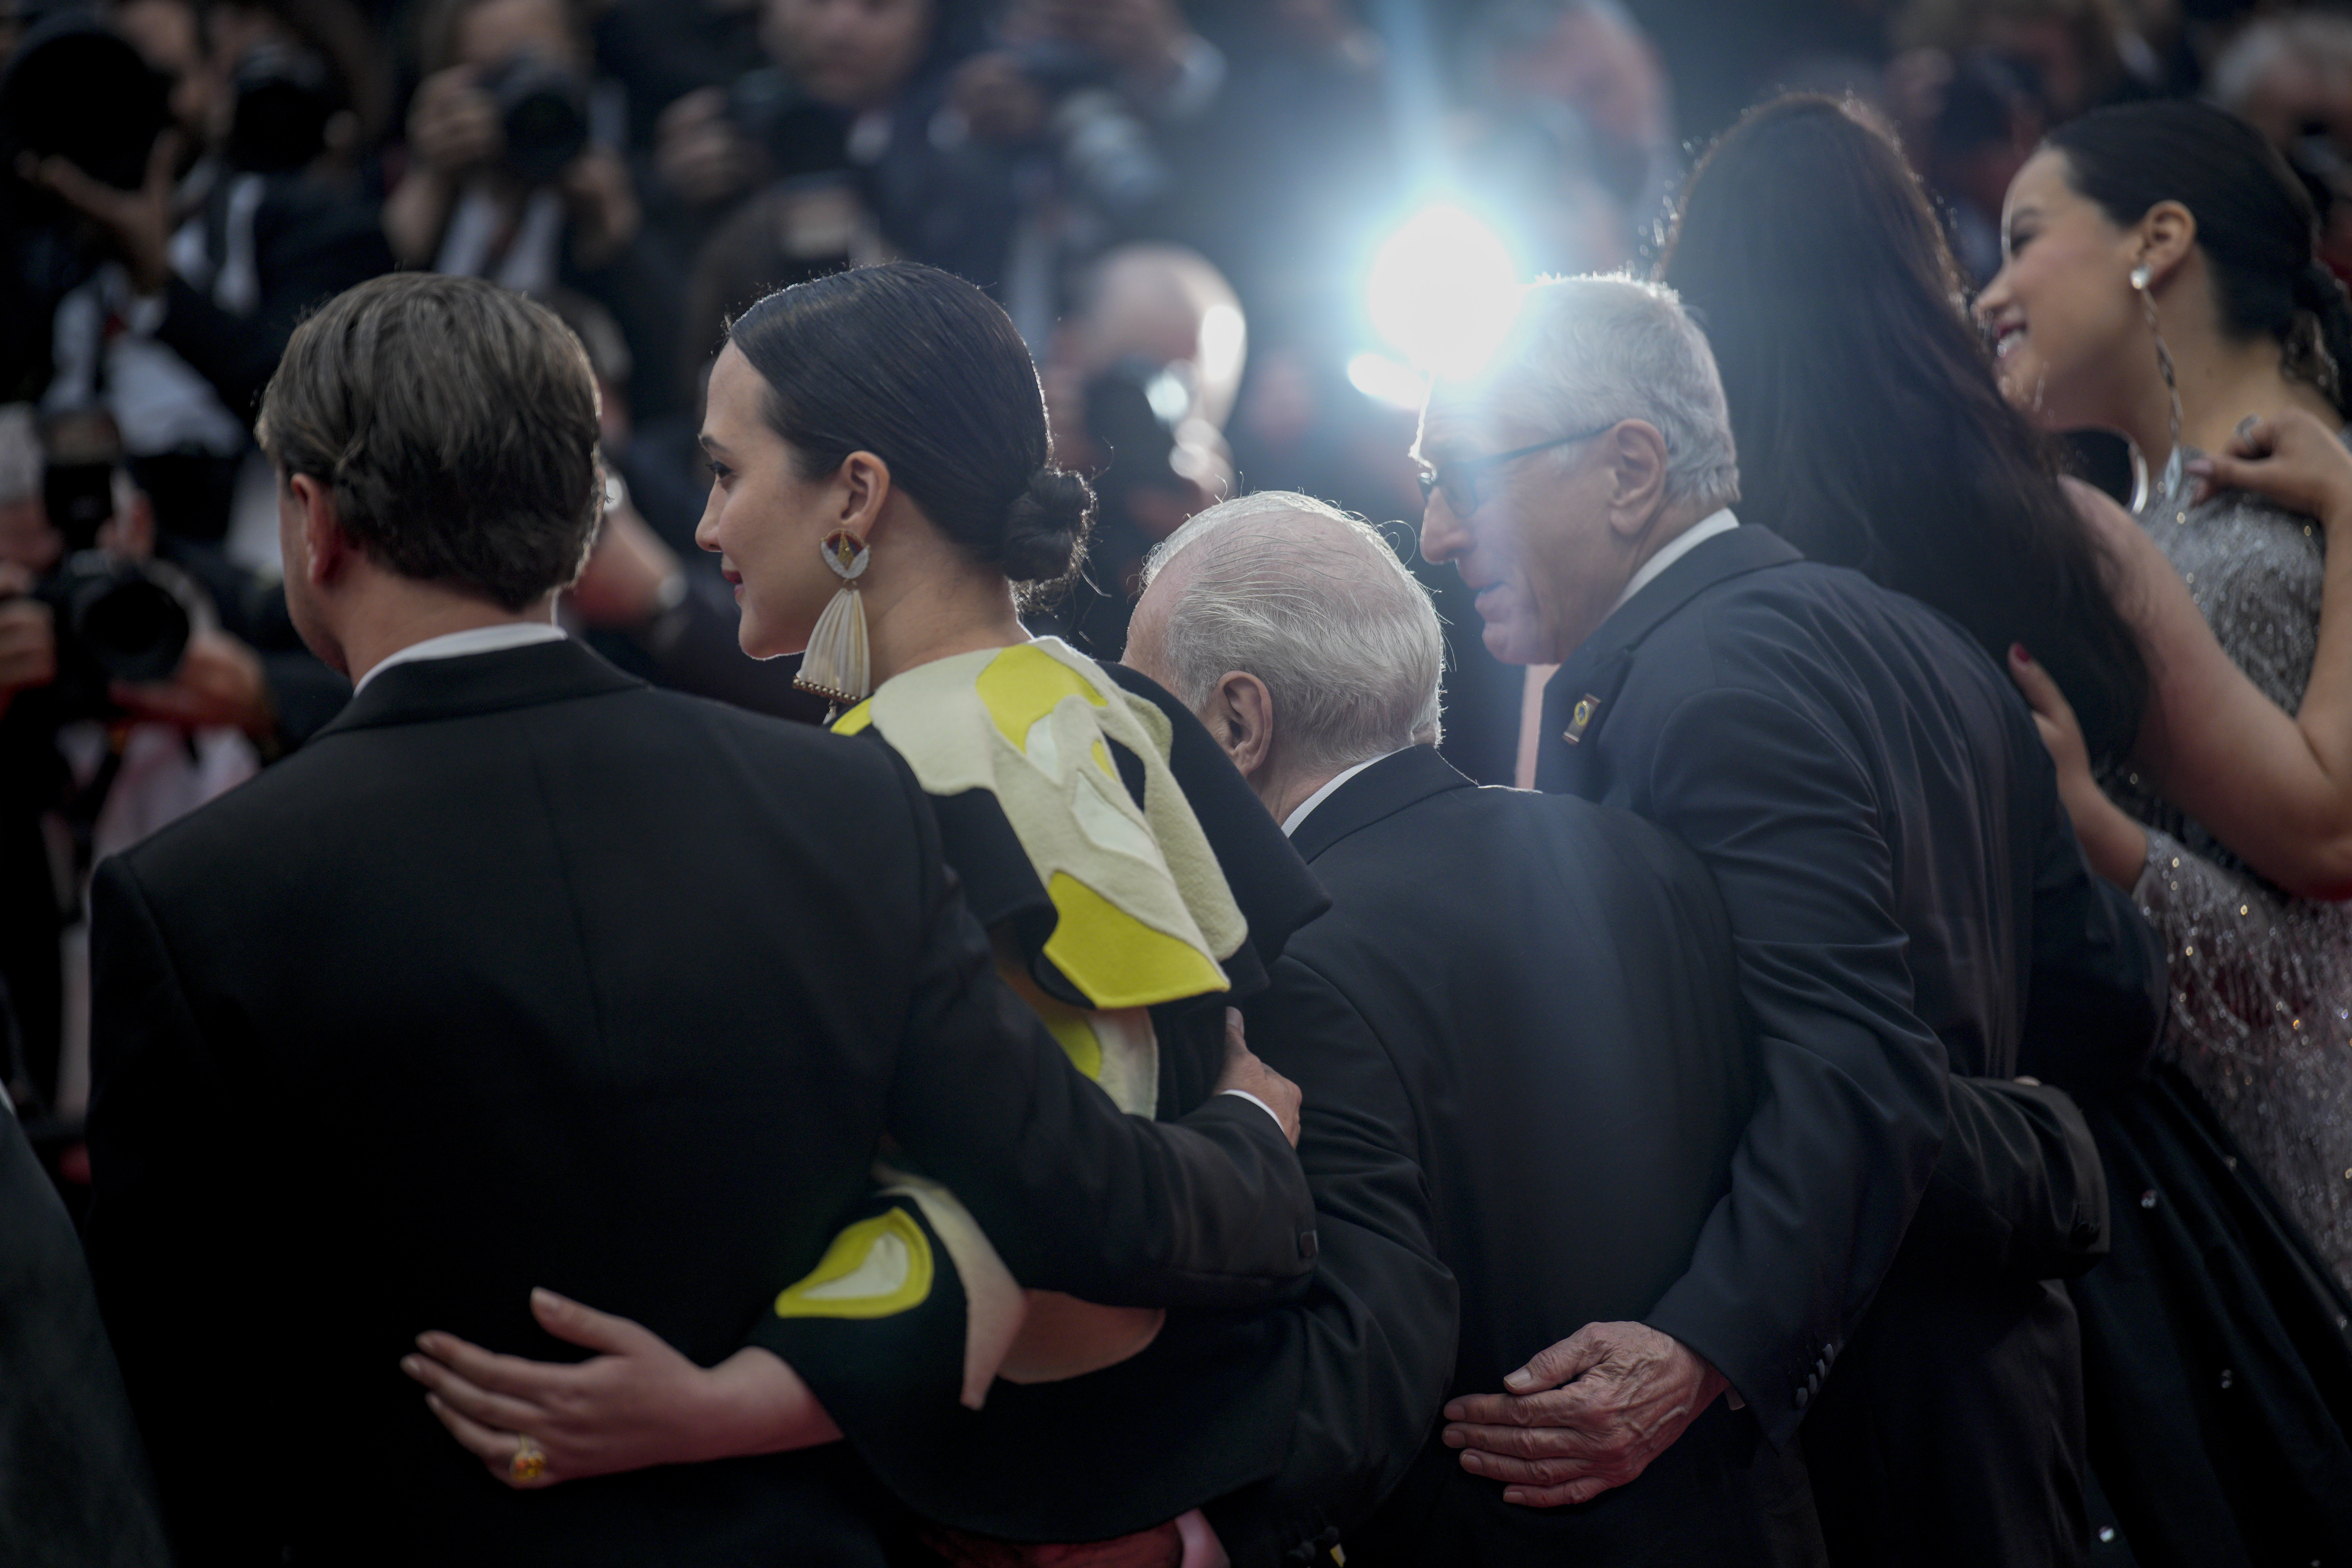 Cannes 2023: Jude Law and Alicia Vikander's 'Firebrand' gets  eight-minute-plus standing ovation